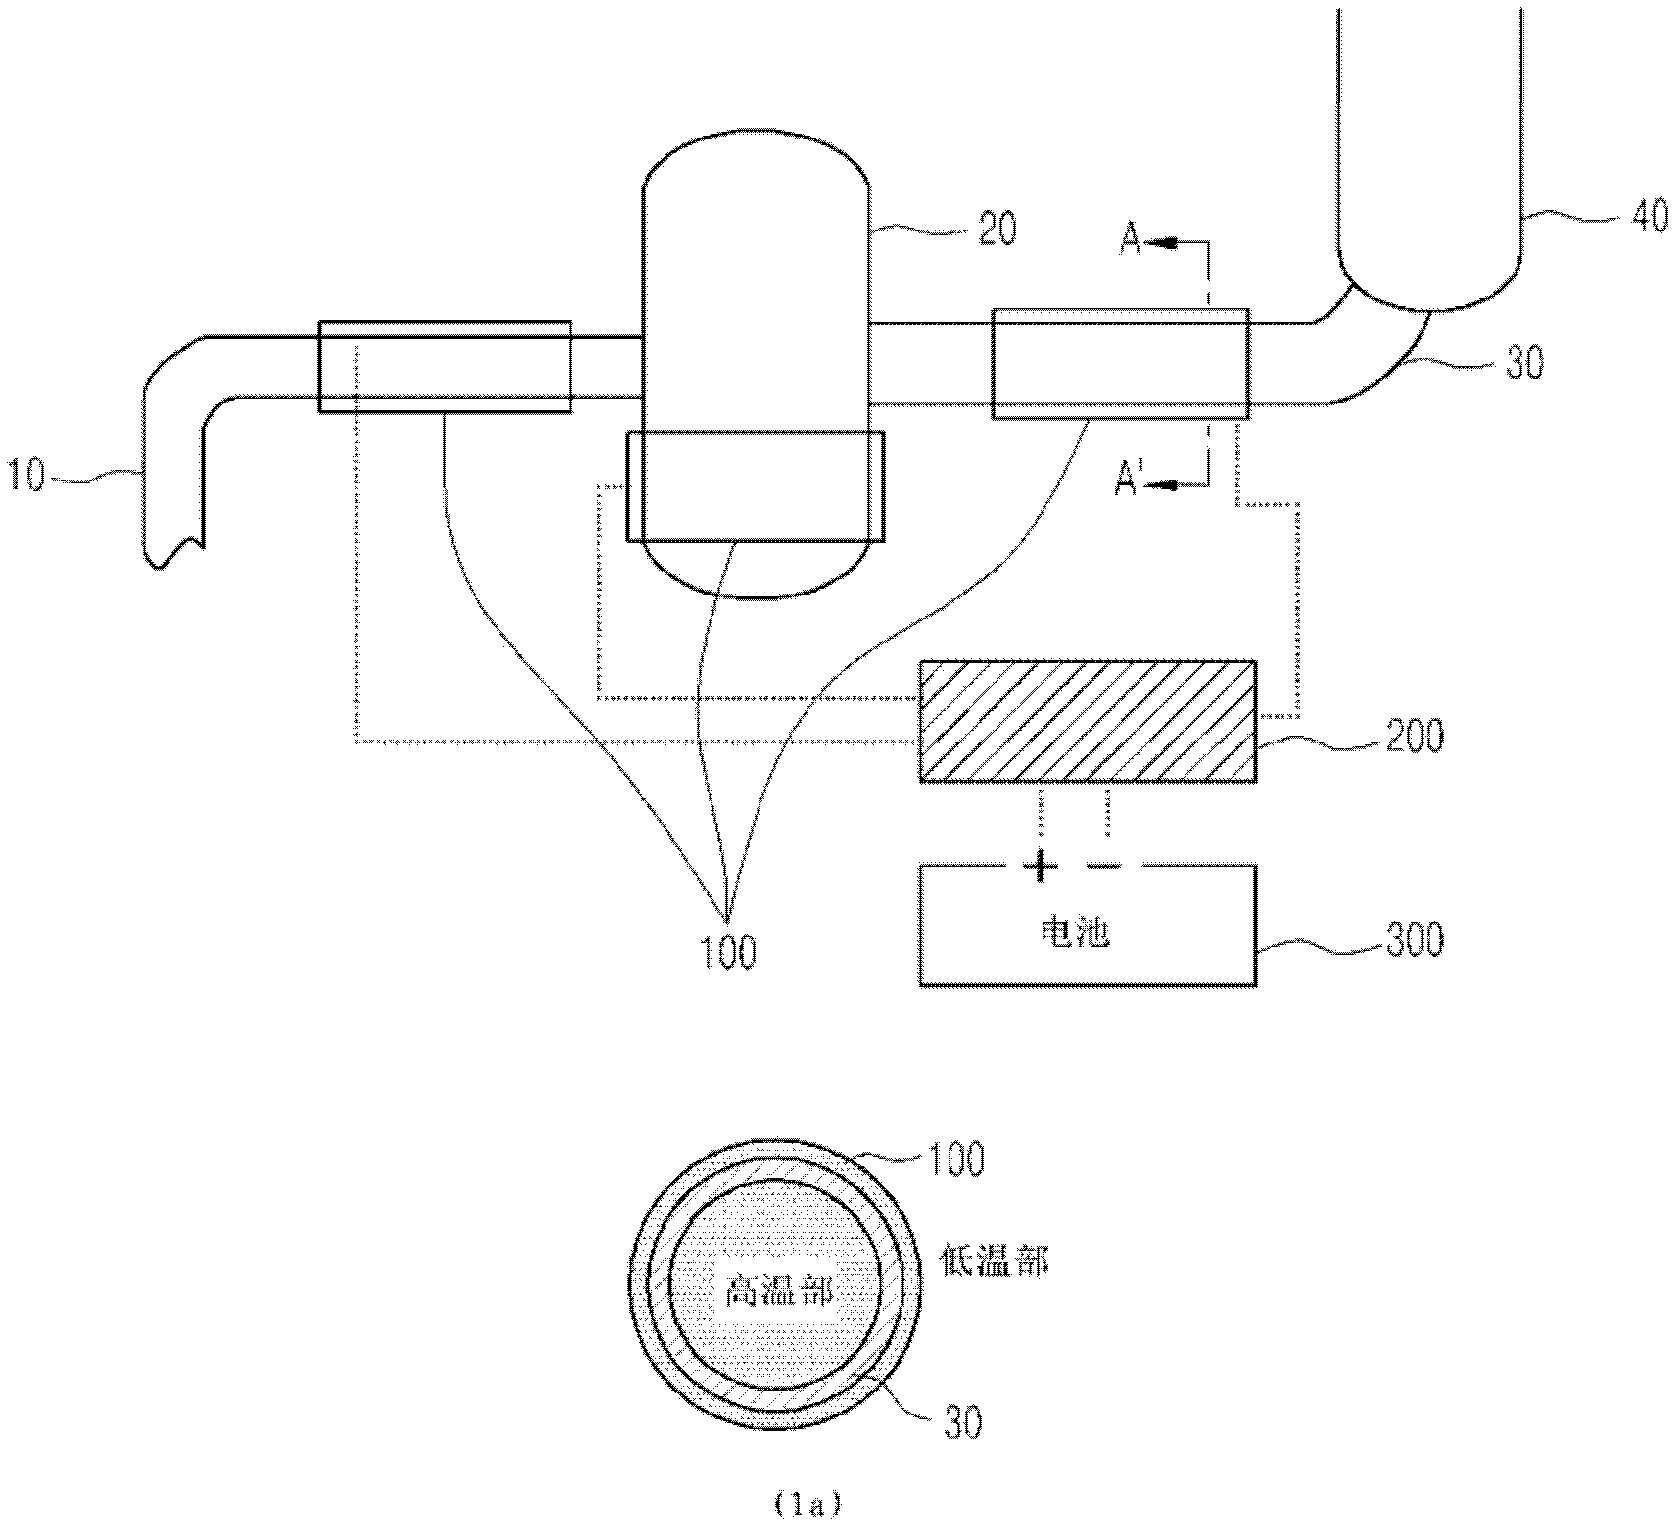 Apparatus for charging atomic power plant emergency battery by using thermoelectric generation element